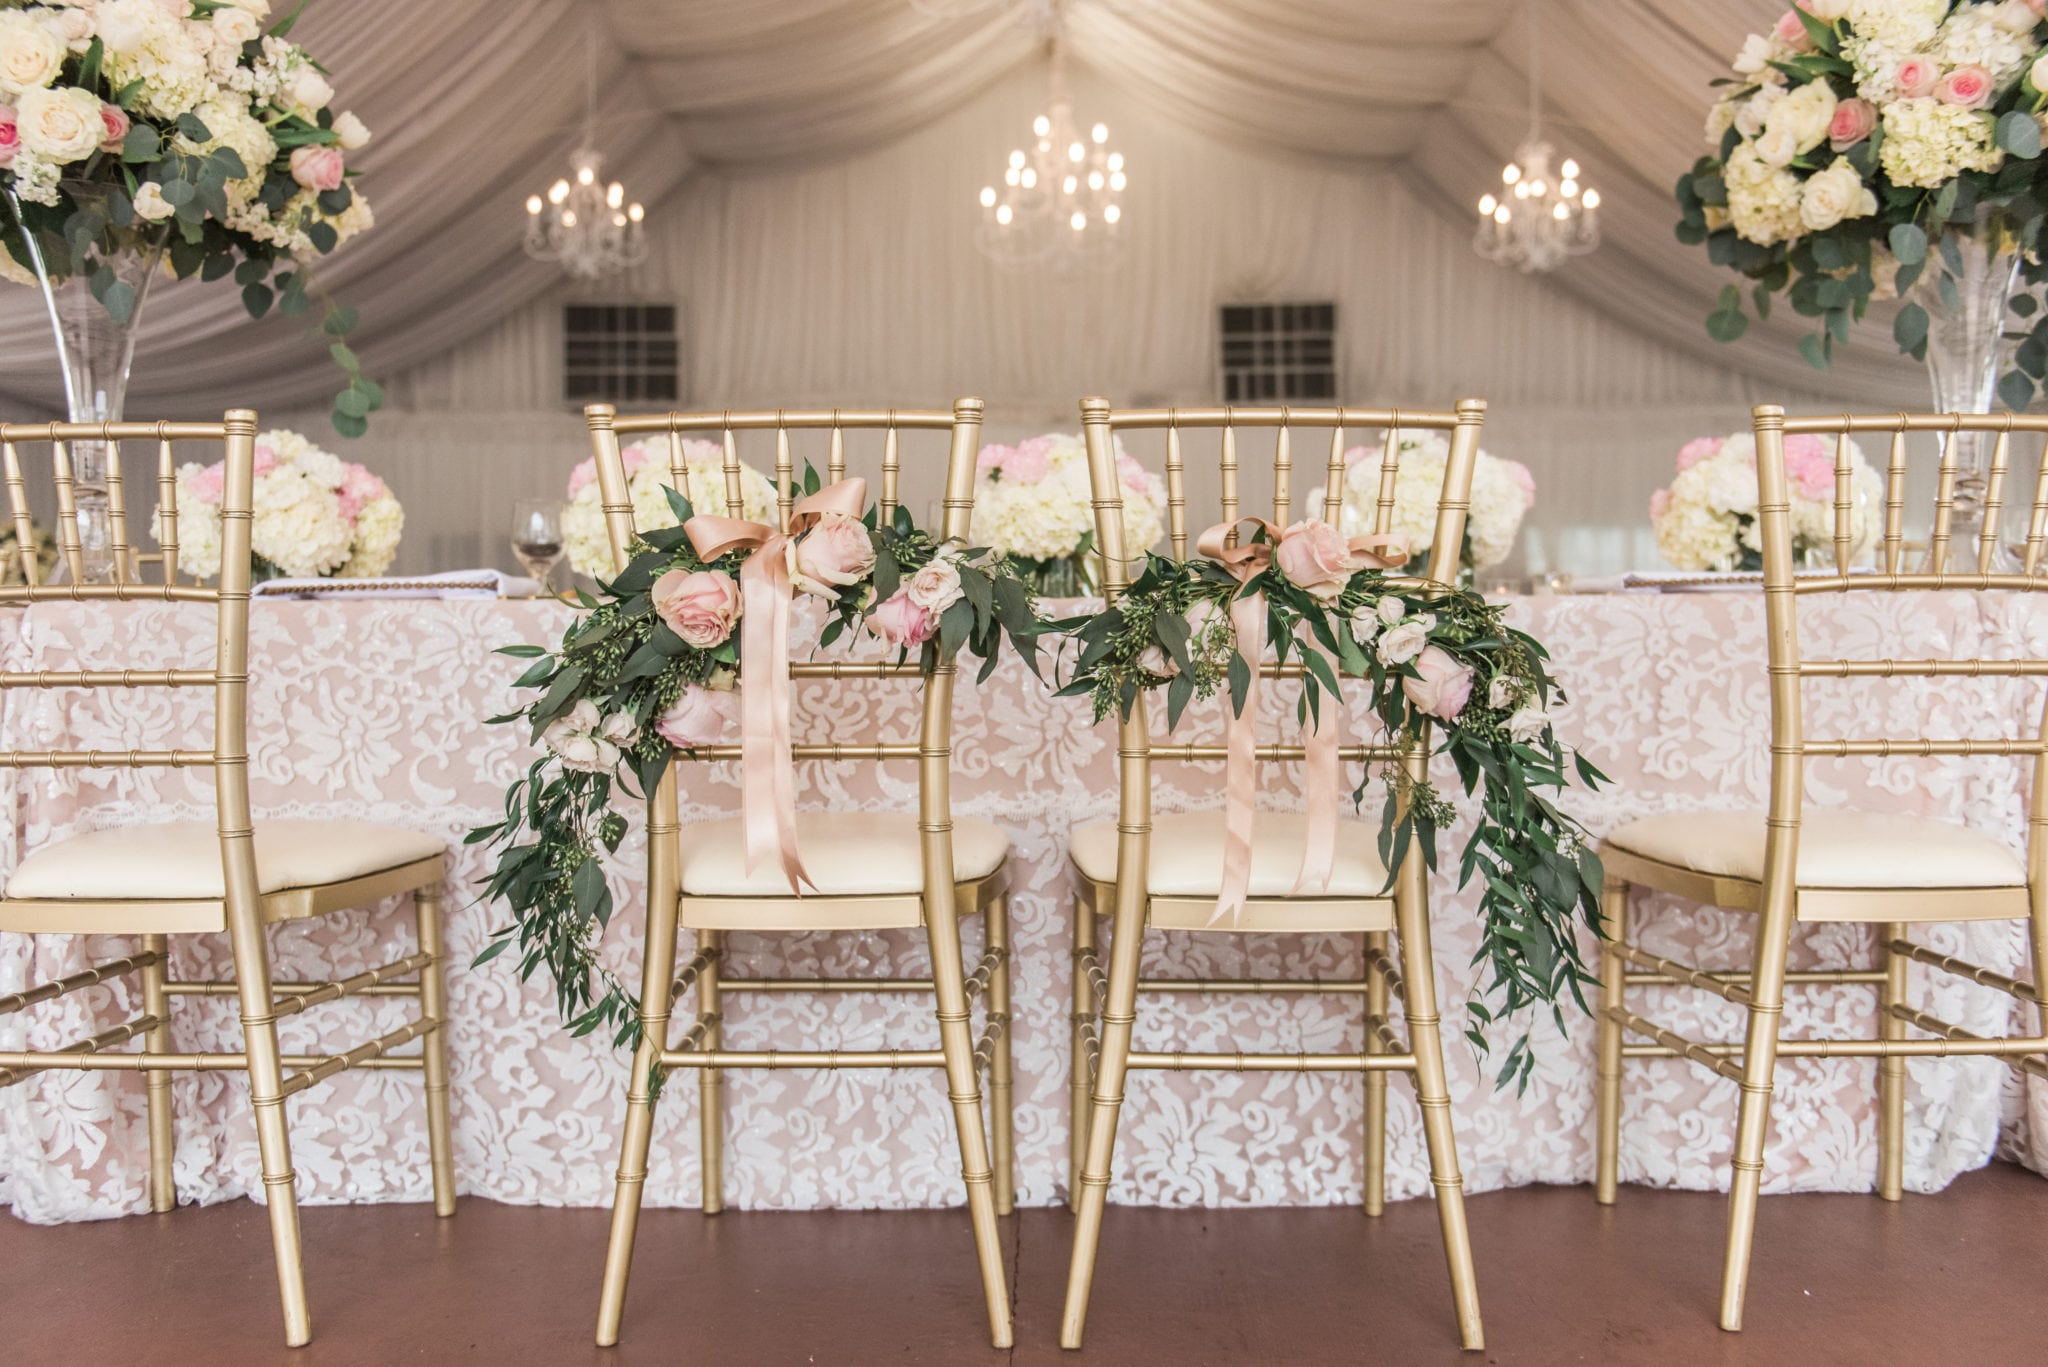 Wedding ceremony had a seated dinner, and the bride and groom's chairs were decorated with florals and greenery